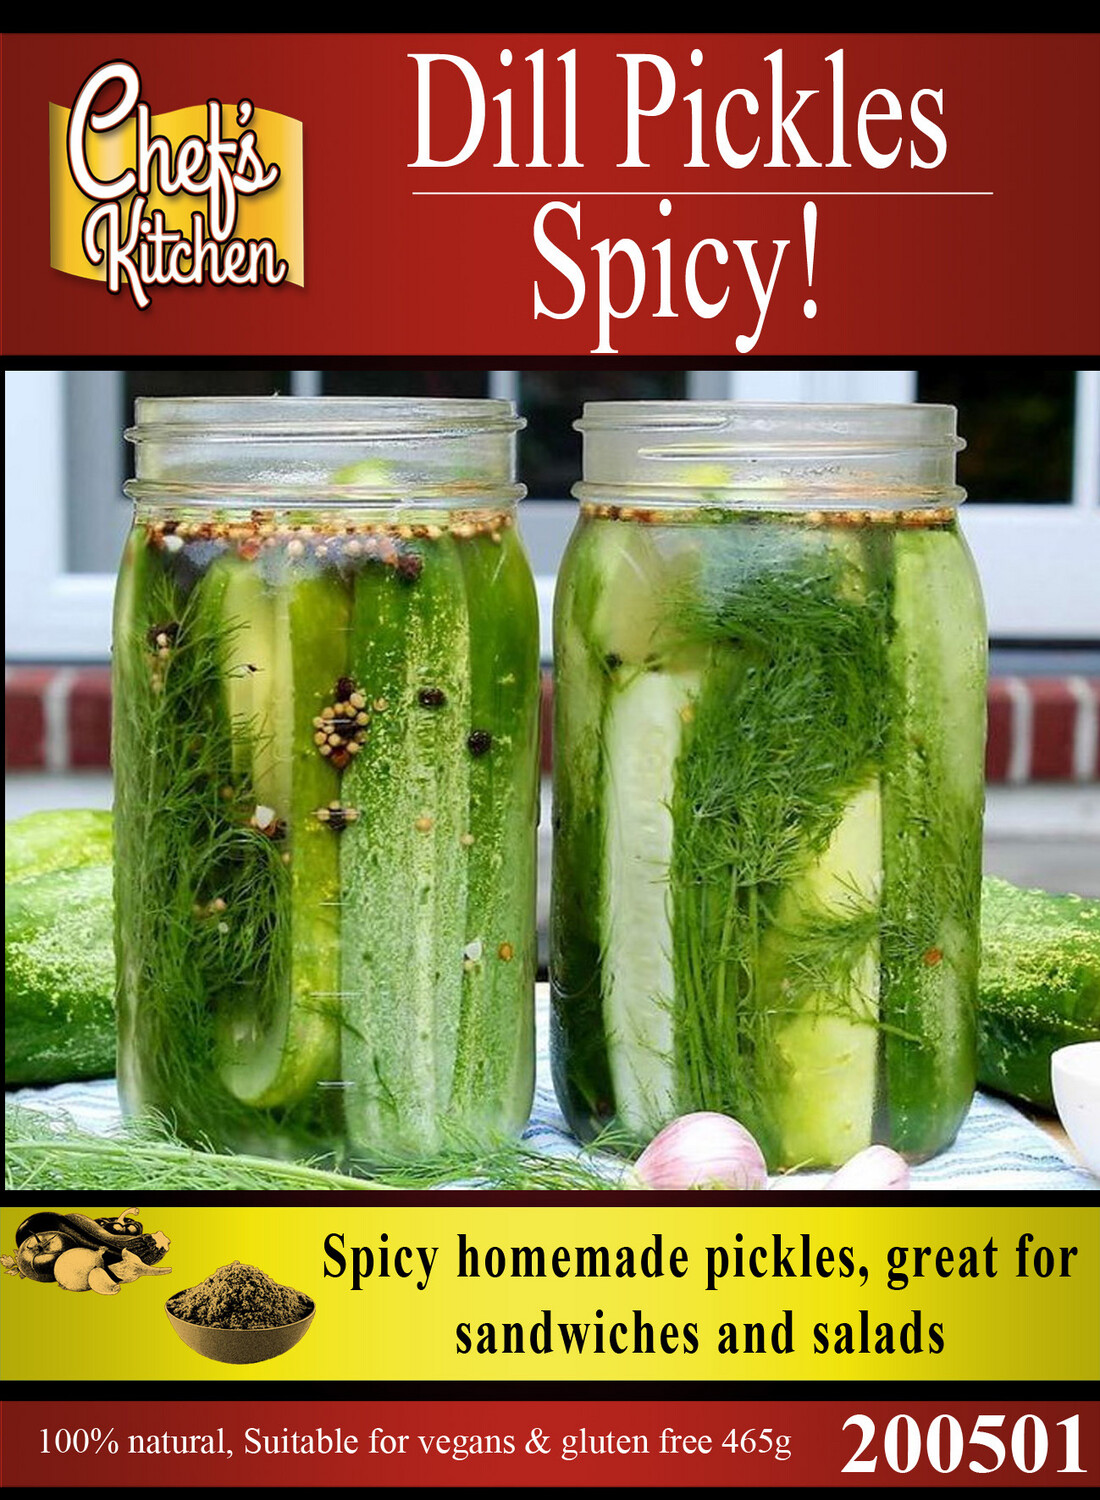 Chef's Kitchen Spicy Pickled Dill Pickles (Gherkins)